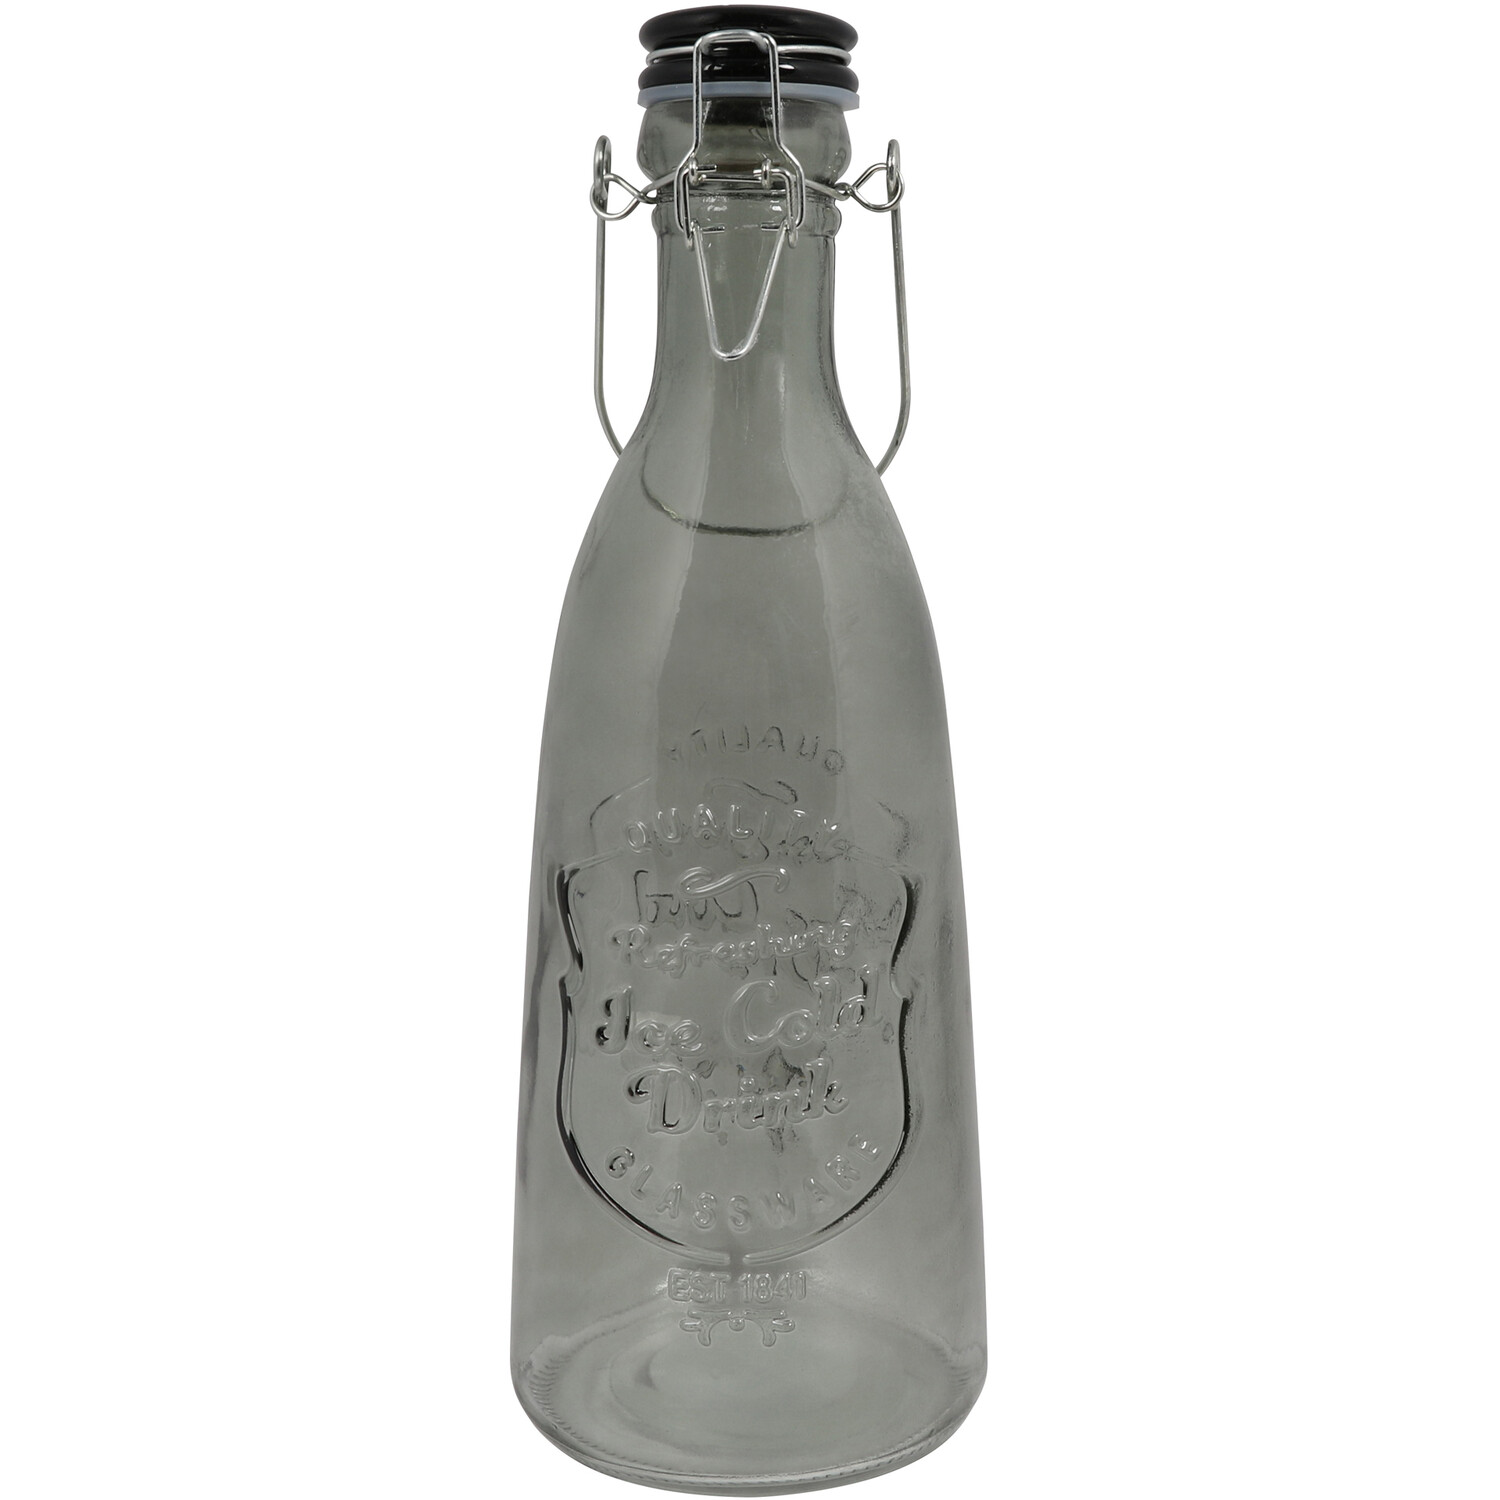 Smoked Glass Bottle with Lid - Grey Image 1